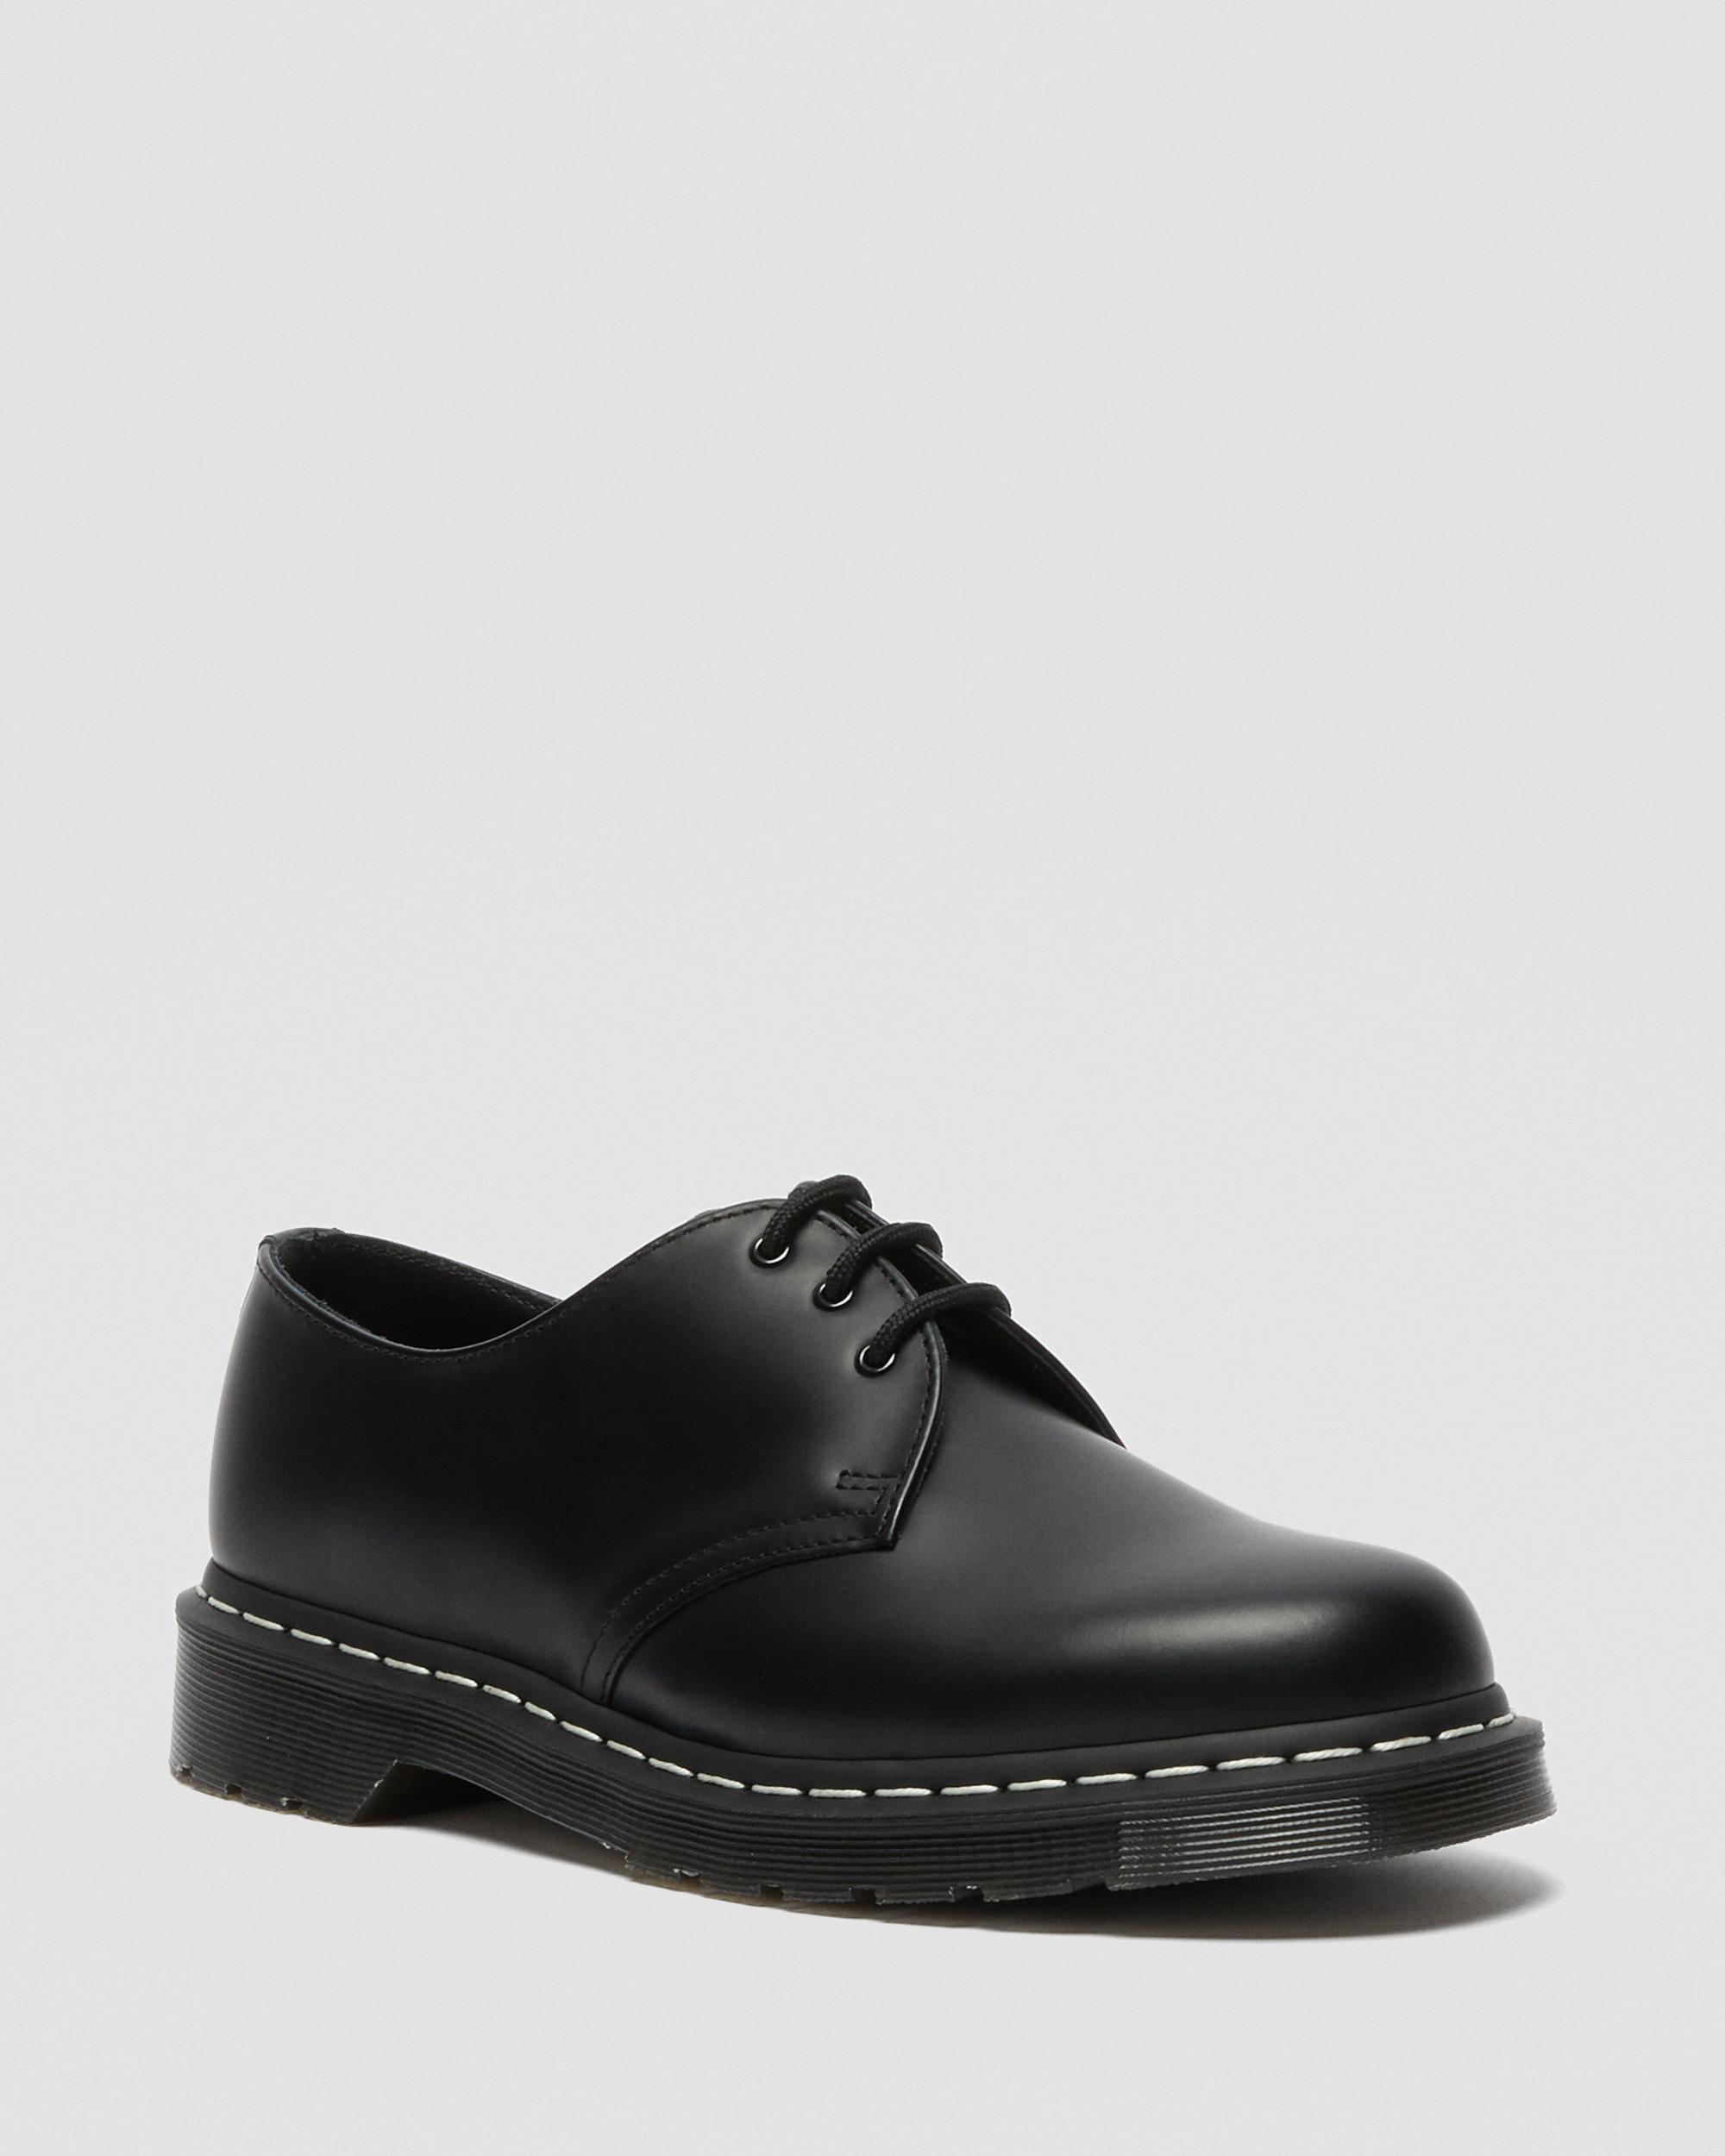 1461 Contrast Stitch Smooth Leather Oxford Shoes1461 Contrast Stitch Smooth Leather Oxford Shoes Dr. Martens